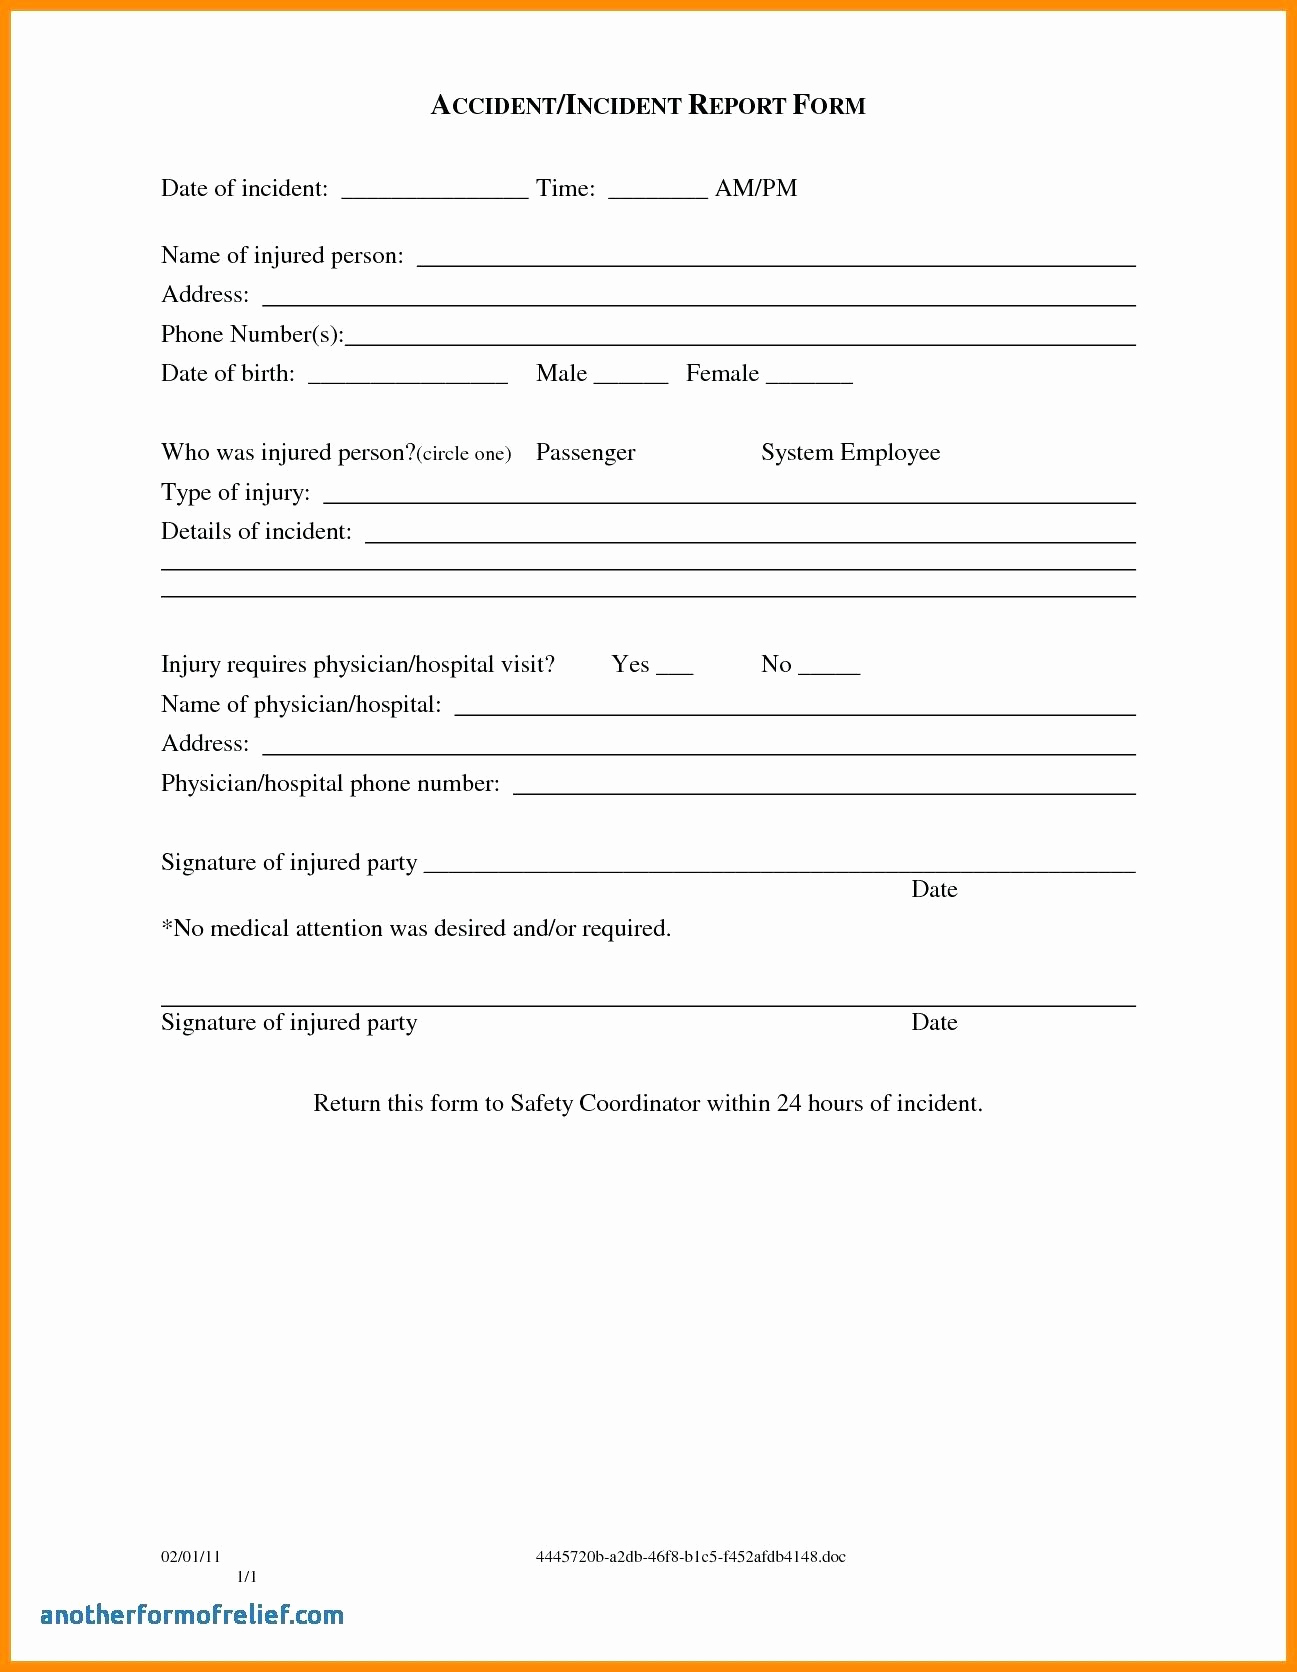 022 Template Ideas Accident Report Forms Incident Hazard For Intended For Incident Hazard Report Form Template